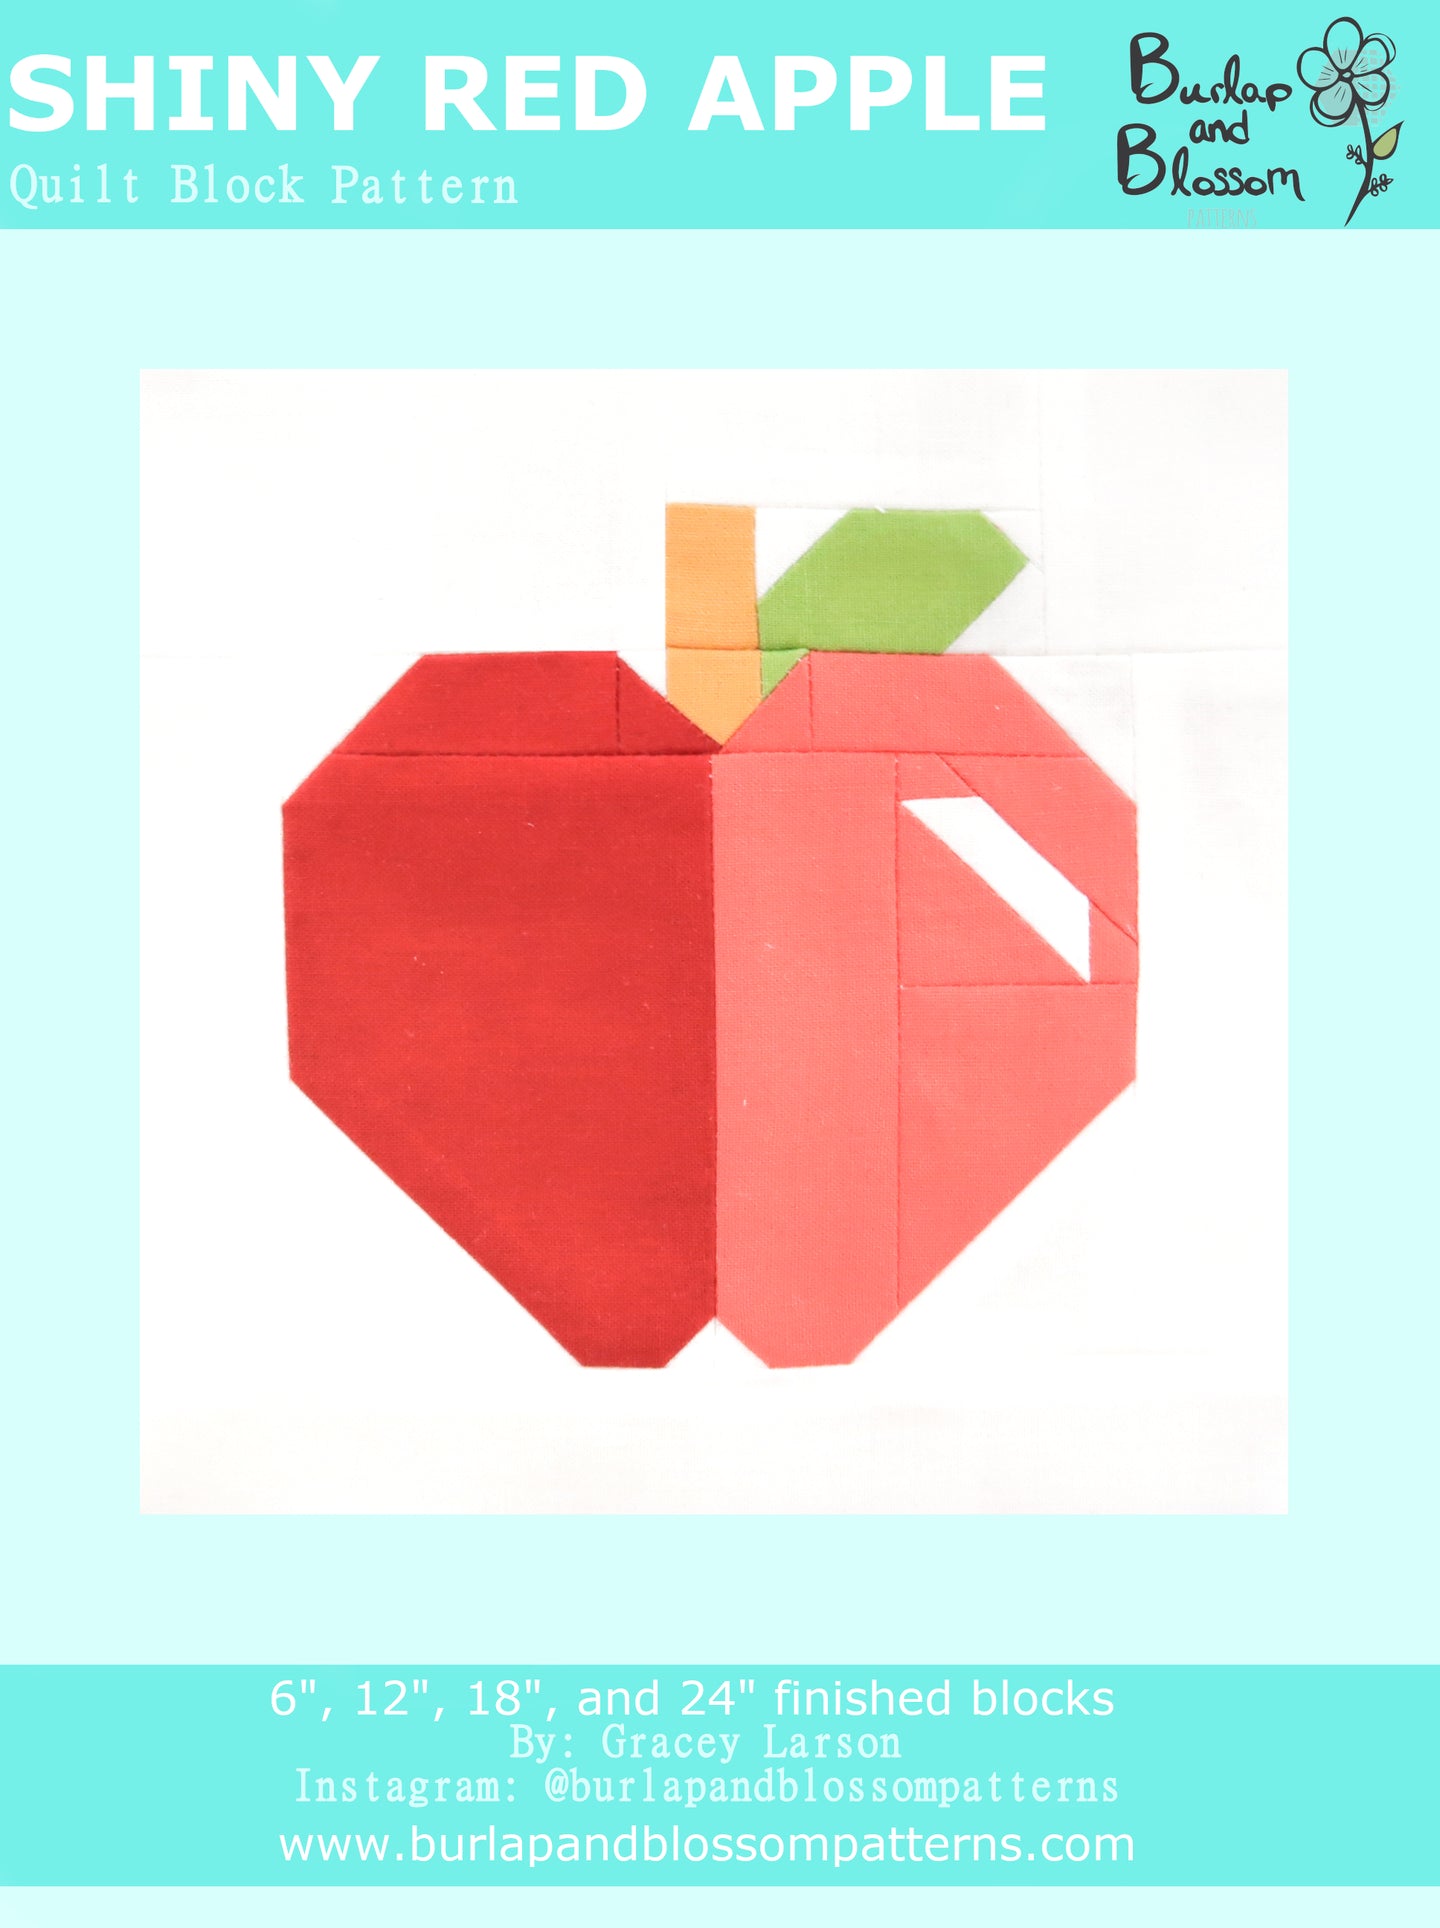 Pattern, Shiny Red Apple Quilt Block by Burlap and Blossom (digital download)